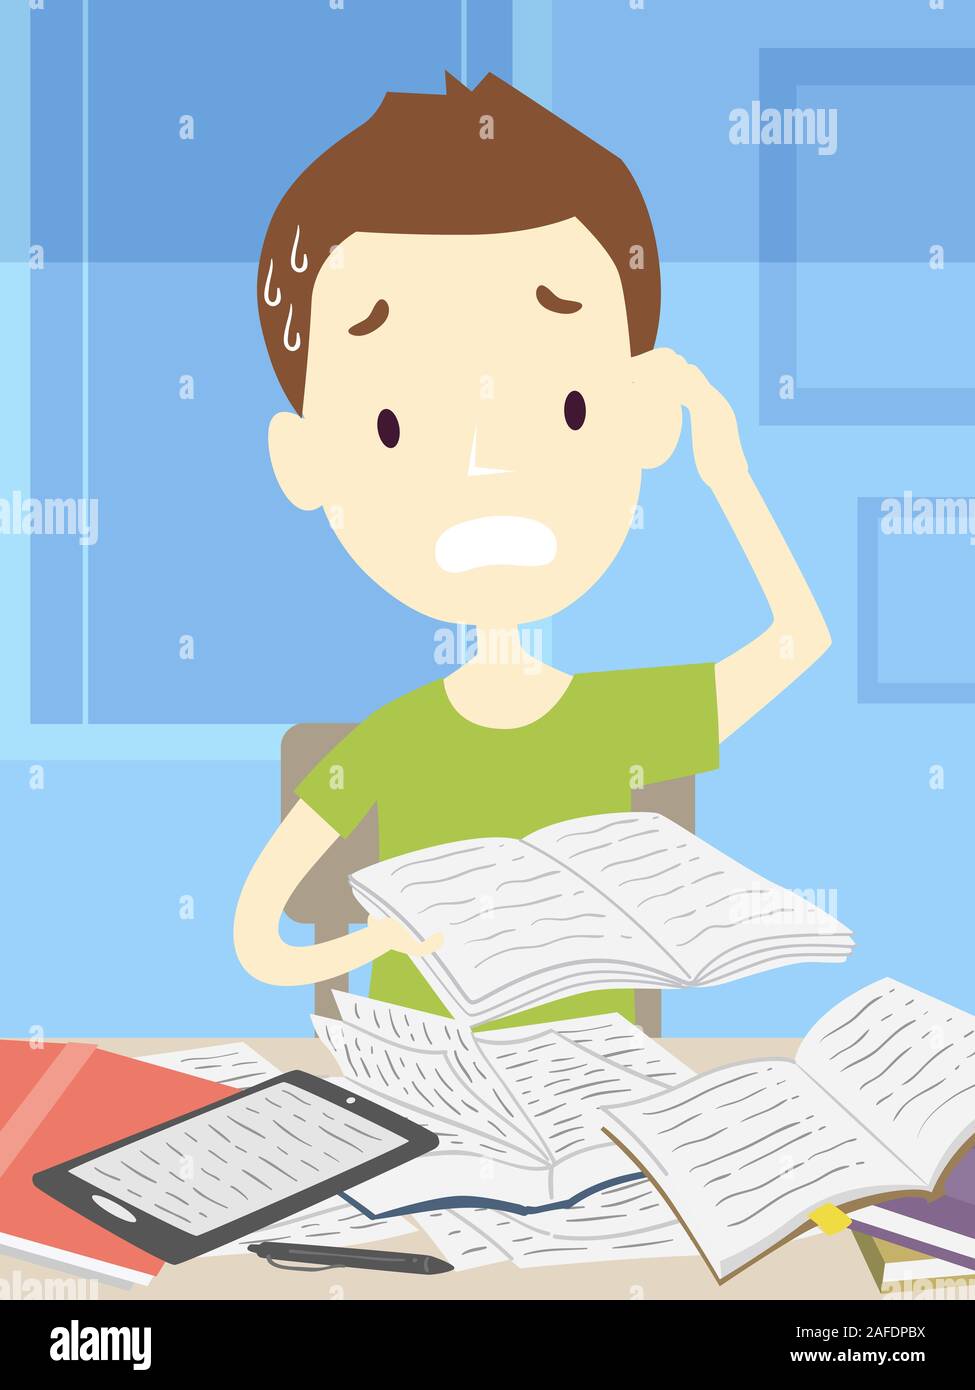 Illustration of a Teenage Guy Scratching Head Worried and Looking Over at Several Open Books, Cramming for an Exam Stock Photo